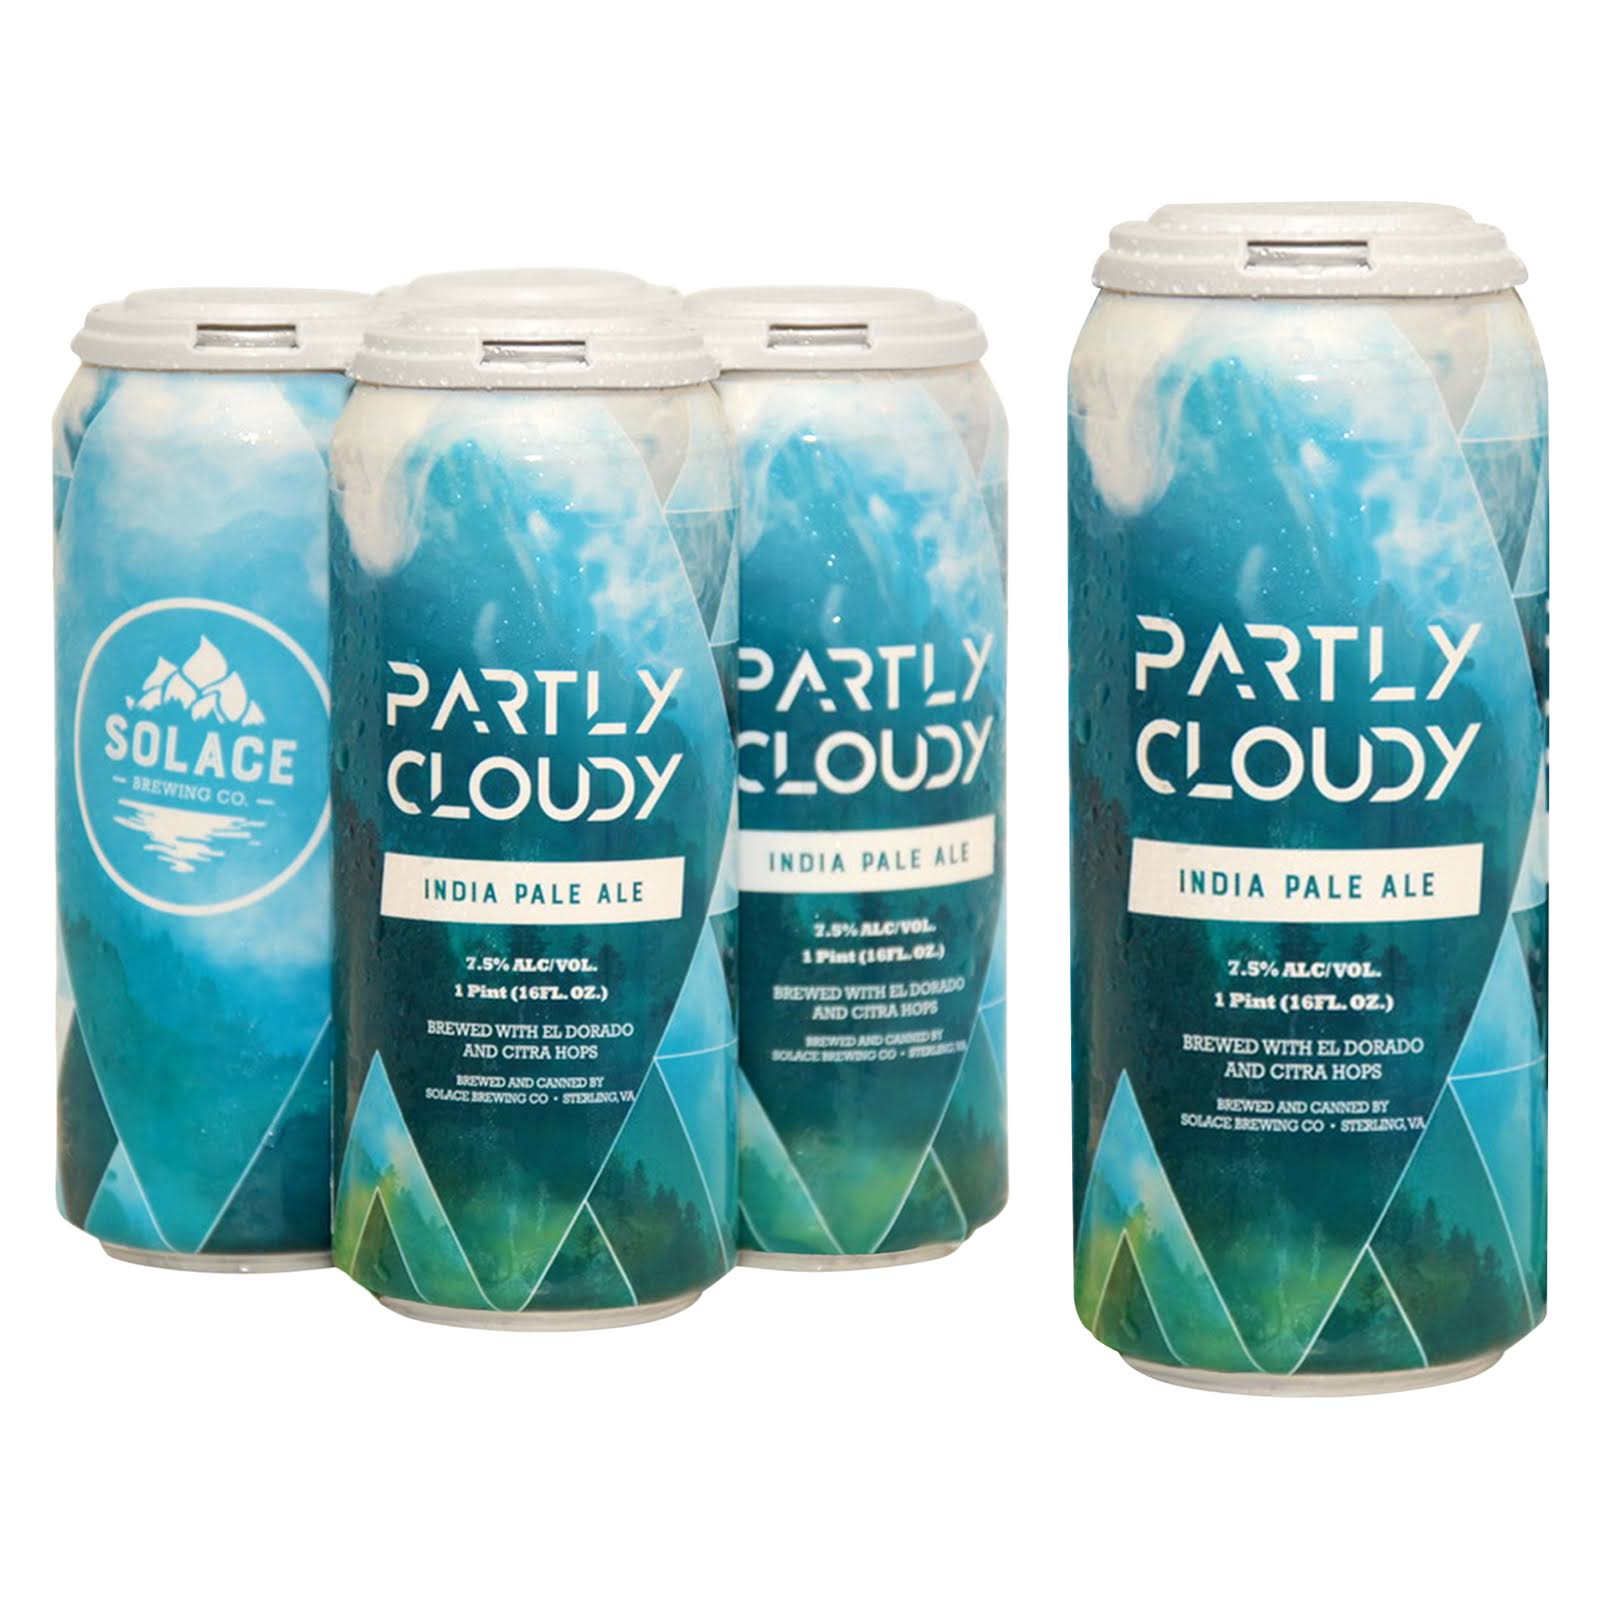 Solace Partly Cloudy IPA - 16oz Can